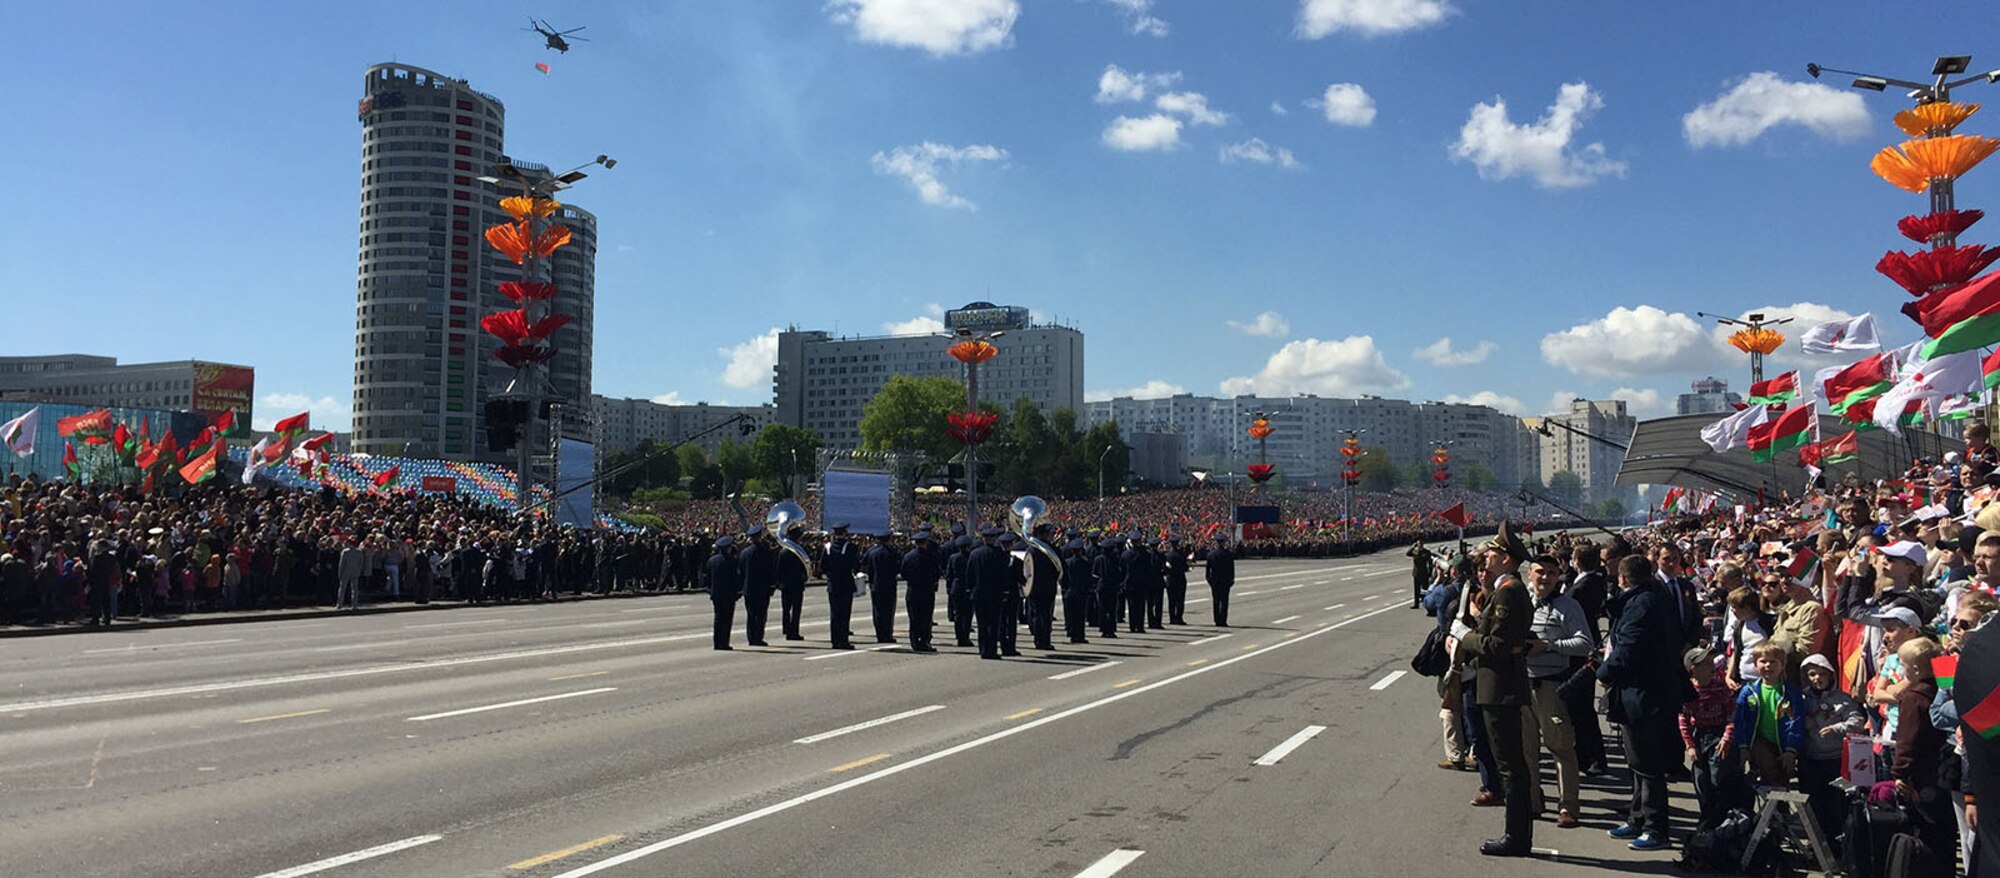 MINSK, BELARUS -- Thirty-four Airmen from the U.S. Air Forces in Europe Band 
march in the World War II Victory Day Parade attended by approximately 150,000 
people, May 9, 2015, in Minsk, Belarus. The band's involvement is the first 
time in Belarus' history that participants from the U.S. Department of Defense 
marched in the parade.  The event commemorates the sacrifices of the World War 
II Allies and the end of hostilities 70 years ago. In addition to their 
participation in the Victory Day parade, which included more than 5,000 
Belarussian soldiers and 250 military vehicles, the USAFE bandsmen performed 
in concerts in Brest and Minsk, Belarus. (U.S. Air Force photo by Master Sgt. 
Brian Bahret)